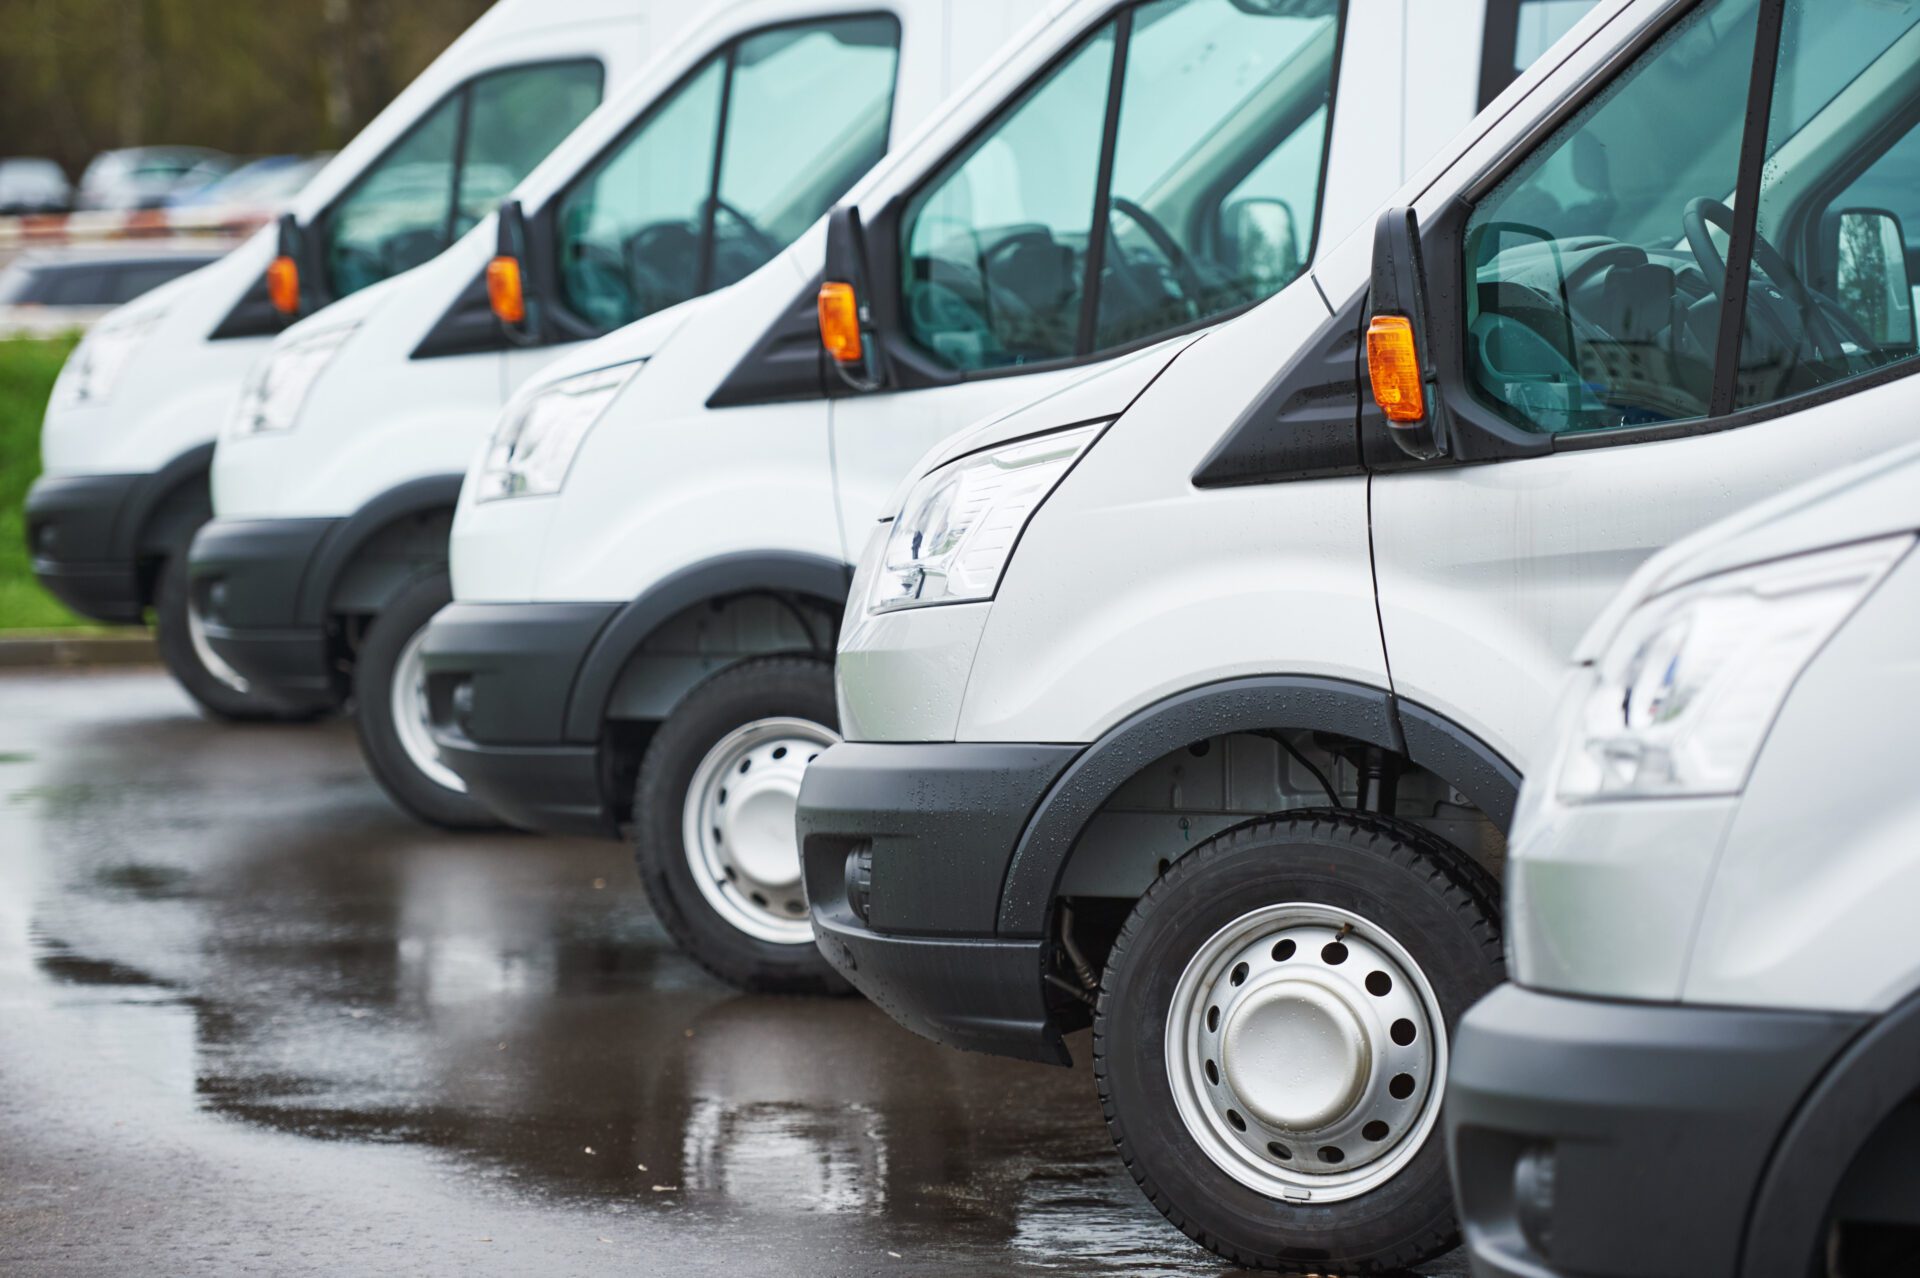 freight services. commercial delivery vans in row at transporting carrier shipping service company parking